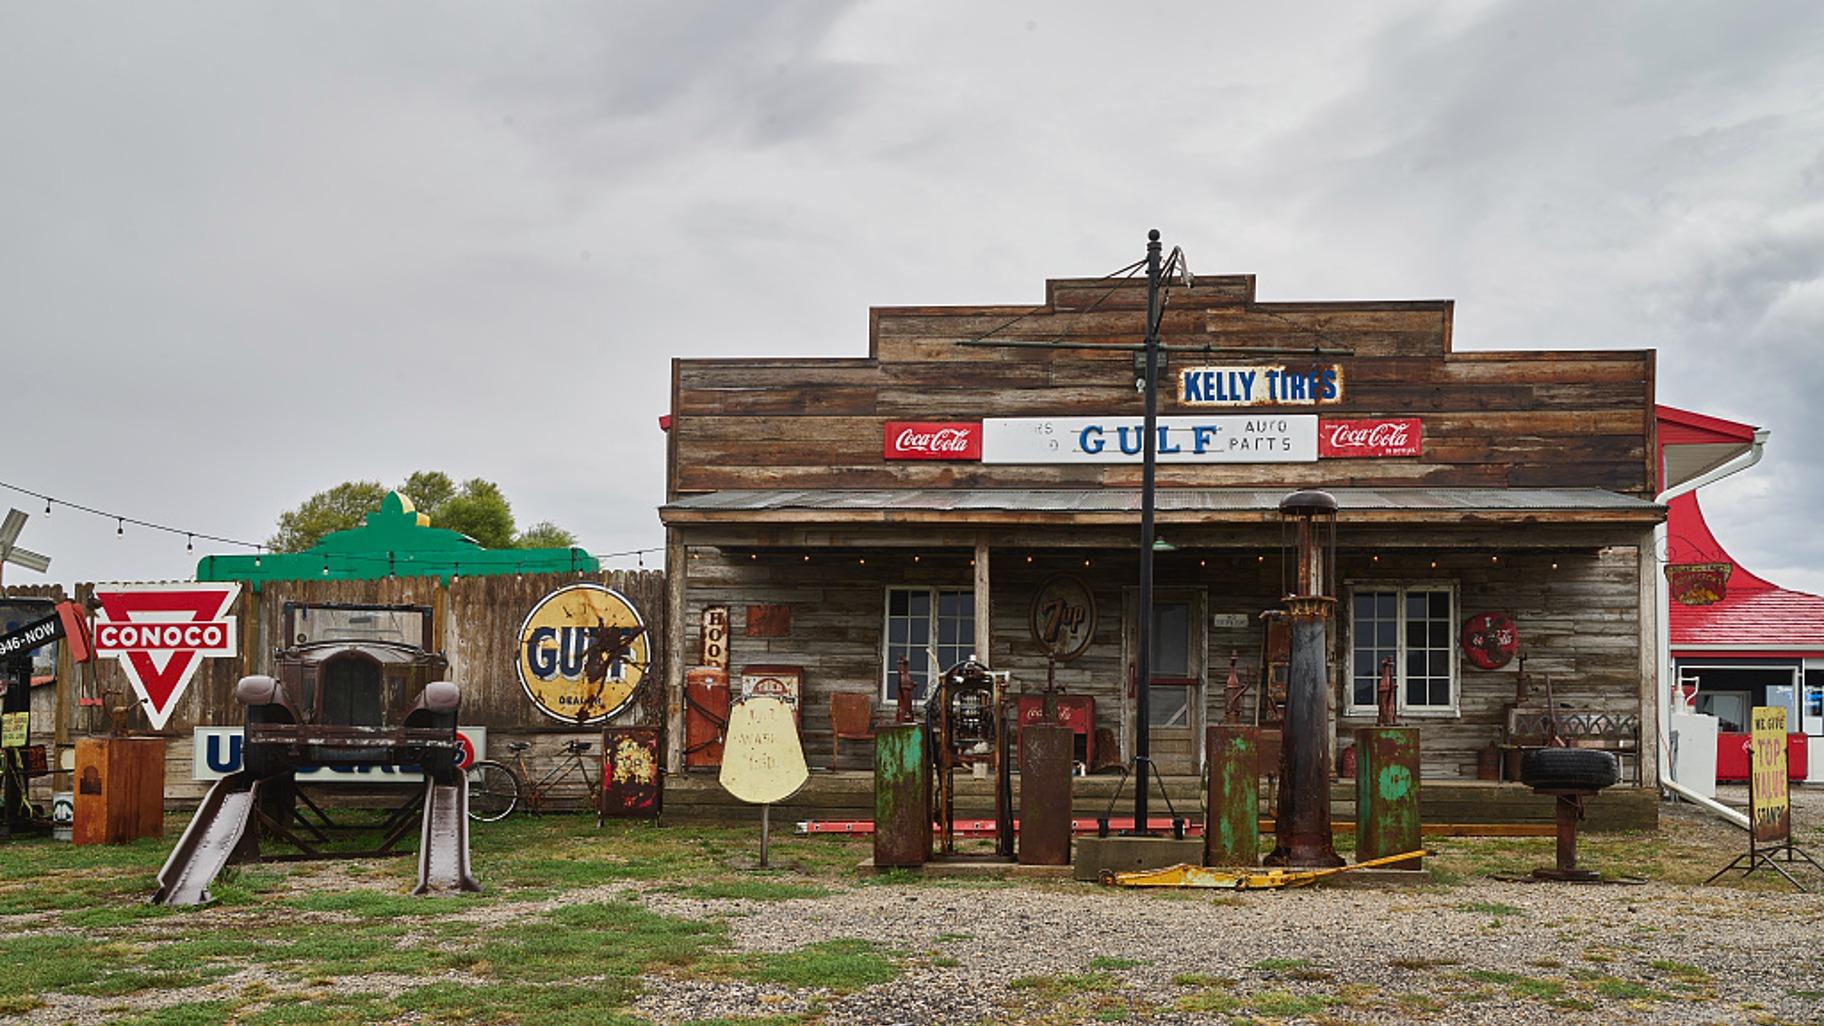 Old roadside gas and service station, re-created at the Route 66 Motorheads Bar, Grill and Museum outside Springfield, Illinois. The owner, Ron Metzger, has collected, restored and displayed many artifacts from the historic, Chicago-to-California two-lane U.S. Route 66 over the years. (Carol M. Highsmith)